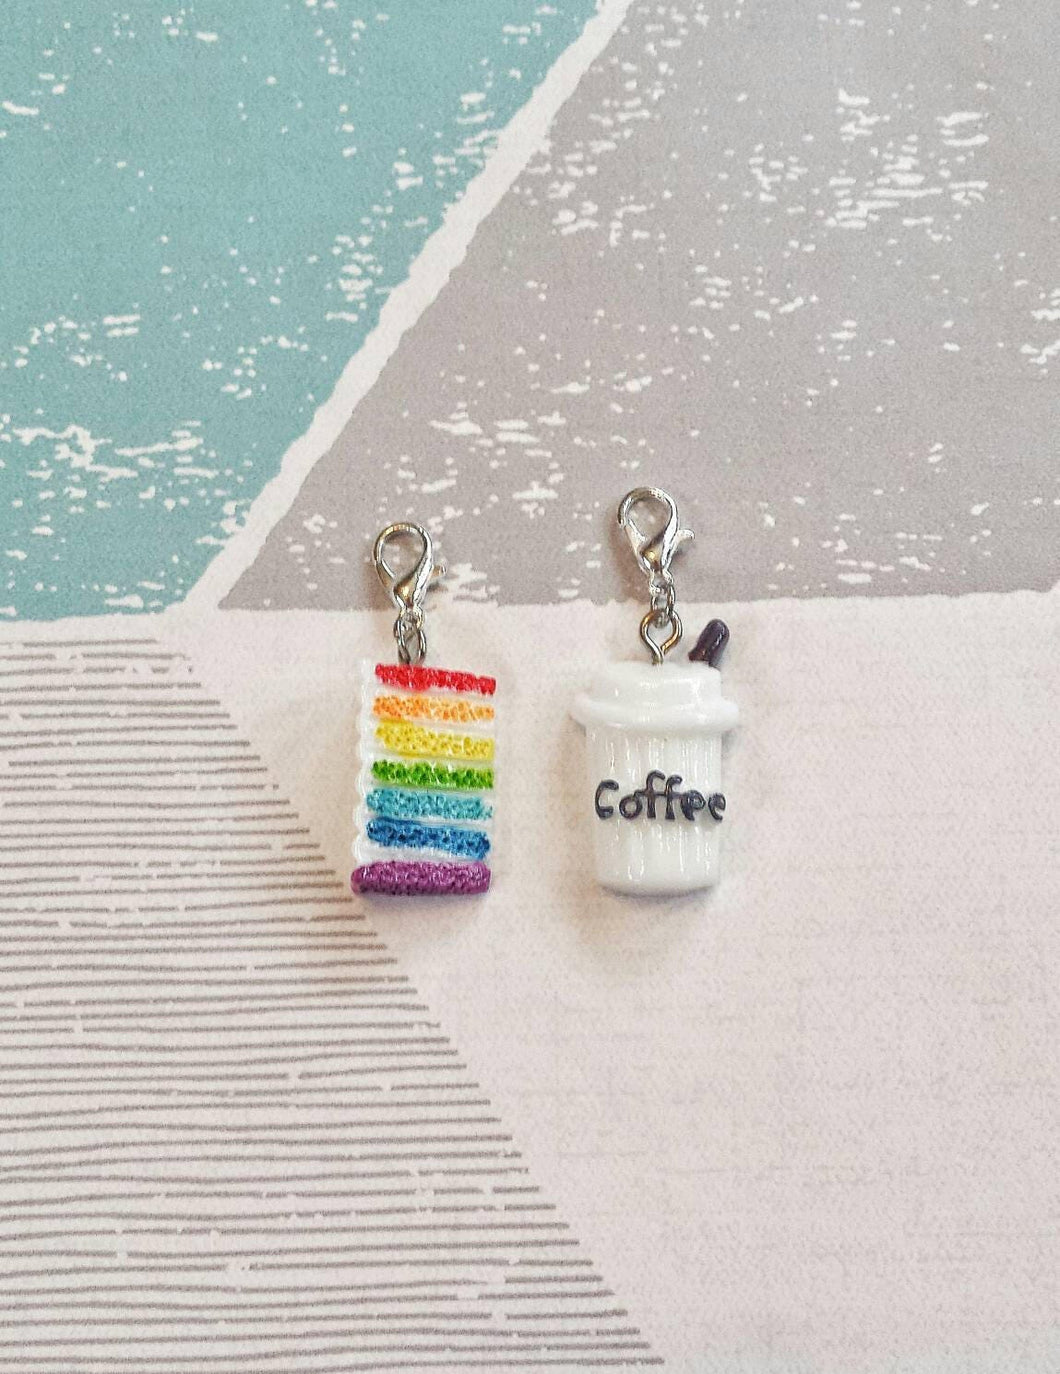 coffee and cake stitch markers, cake progress keepers, coffee knitting markers